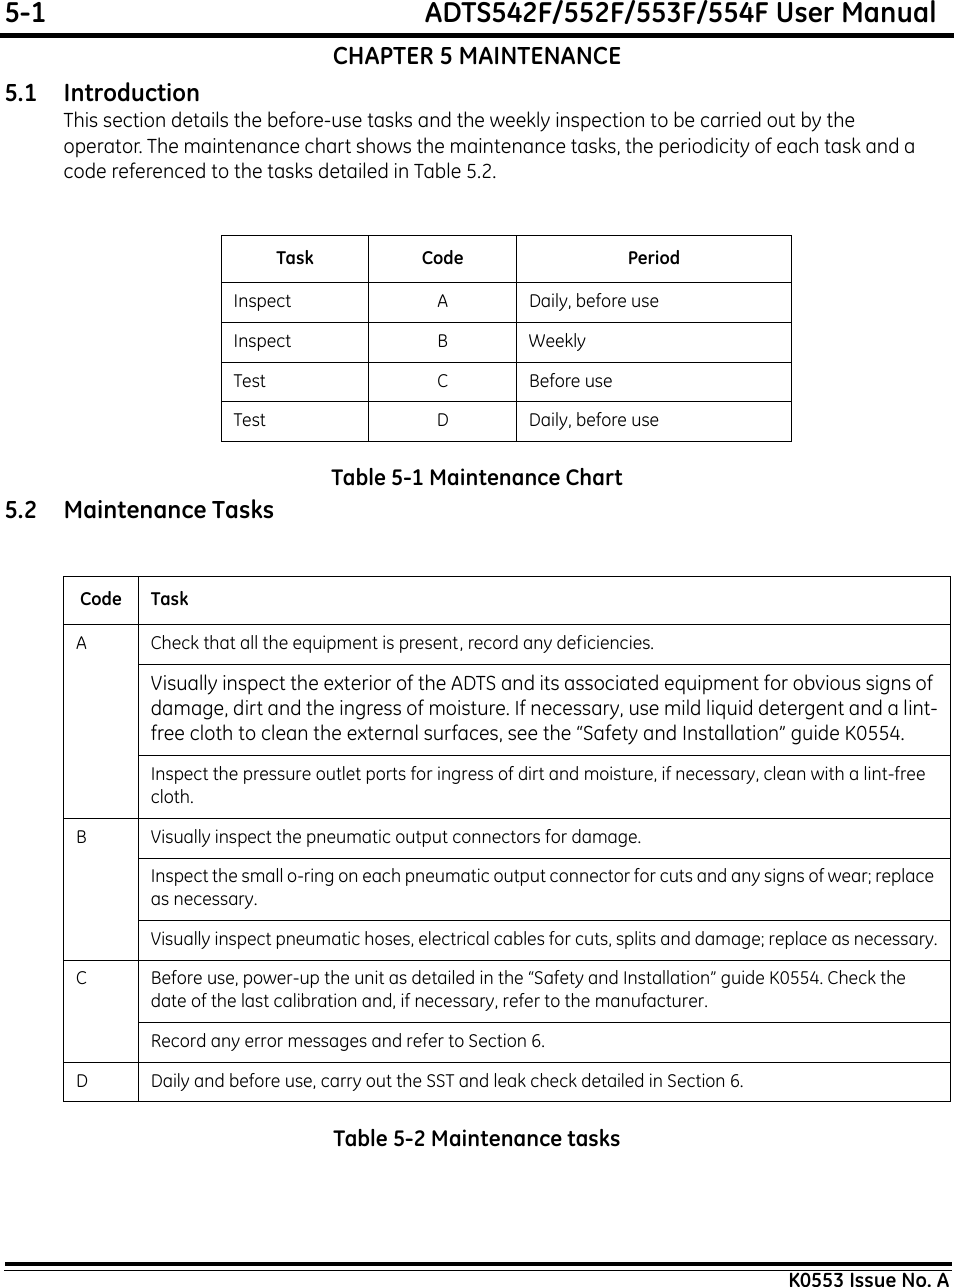 5-1  ADTS542F/552F/553F/554F User ManualK0553 Issue No. ACHAPTER 5 MAINTENANCE5.1 IntroductionThis section details the before-use tasks and the weekly inspection to be carried out by the operator. The maintenance chart shows the maintenance tasks, the periodicity of each task and a code referenced to the tasks detailed in Table 5.2. Table 5-1 Maintenance Chart5.2 Maintenance TasksTable 5-2 Maintenance tasksTask Code PeriodInspect A Daily, before useInspect B WeeklyTest C Before useTest D Daily, before useCode TaskA Check that all the equipment is present, record any deficiencies.Visually inspect the exterior of the ADTS and its associated equipment for obvious signs of damage, dirt and the ingress of moisture. If necessary, use mild liquid detergent and a lint-free cloth to clean the external surfaces, see the “Safety and Installation” guide K0554.Inspect the pressure outlet ports for ingress of dirt and moisture, if necessary, clean with a lint-free cloth.B Visually inspect the pneumatic output connectors for damage.Inspect the small o-ring on each pneumatic output connector for cuts and any signs of wear; replace as necessary.Visually inspect pneumatic hoses, electrical cables for cuts, splits and damage; replace as necessary.C Before use, power-up the unit as detailed in the “Safety and Installation” guide K0554. Check the date of the last calibration and, if necessary, refer to the manufacturer.Record any error messages and refer to Section 6.D Daily and before use, carry out the SST and leak check detailed in Section 6.